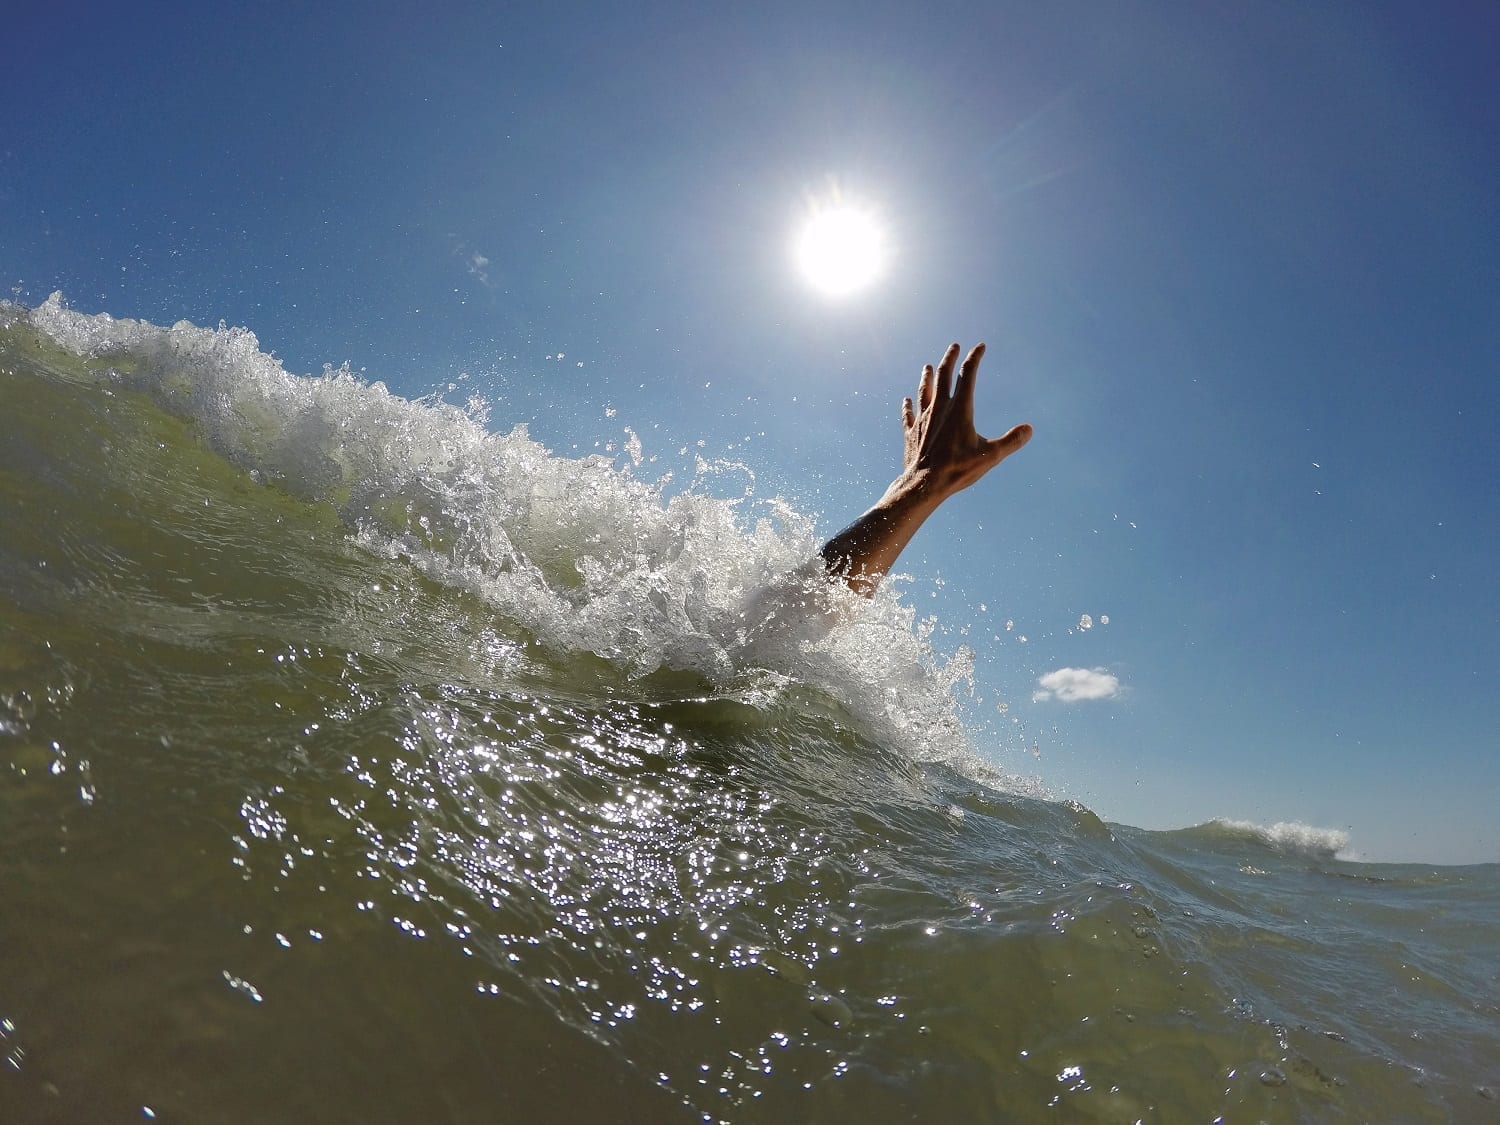 Drowning person's arm coming up out of a wave: Photo 76671162 © Mike_kiev - Dreamstime.com